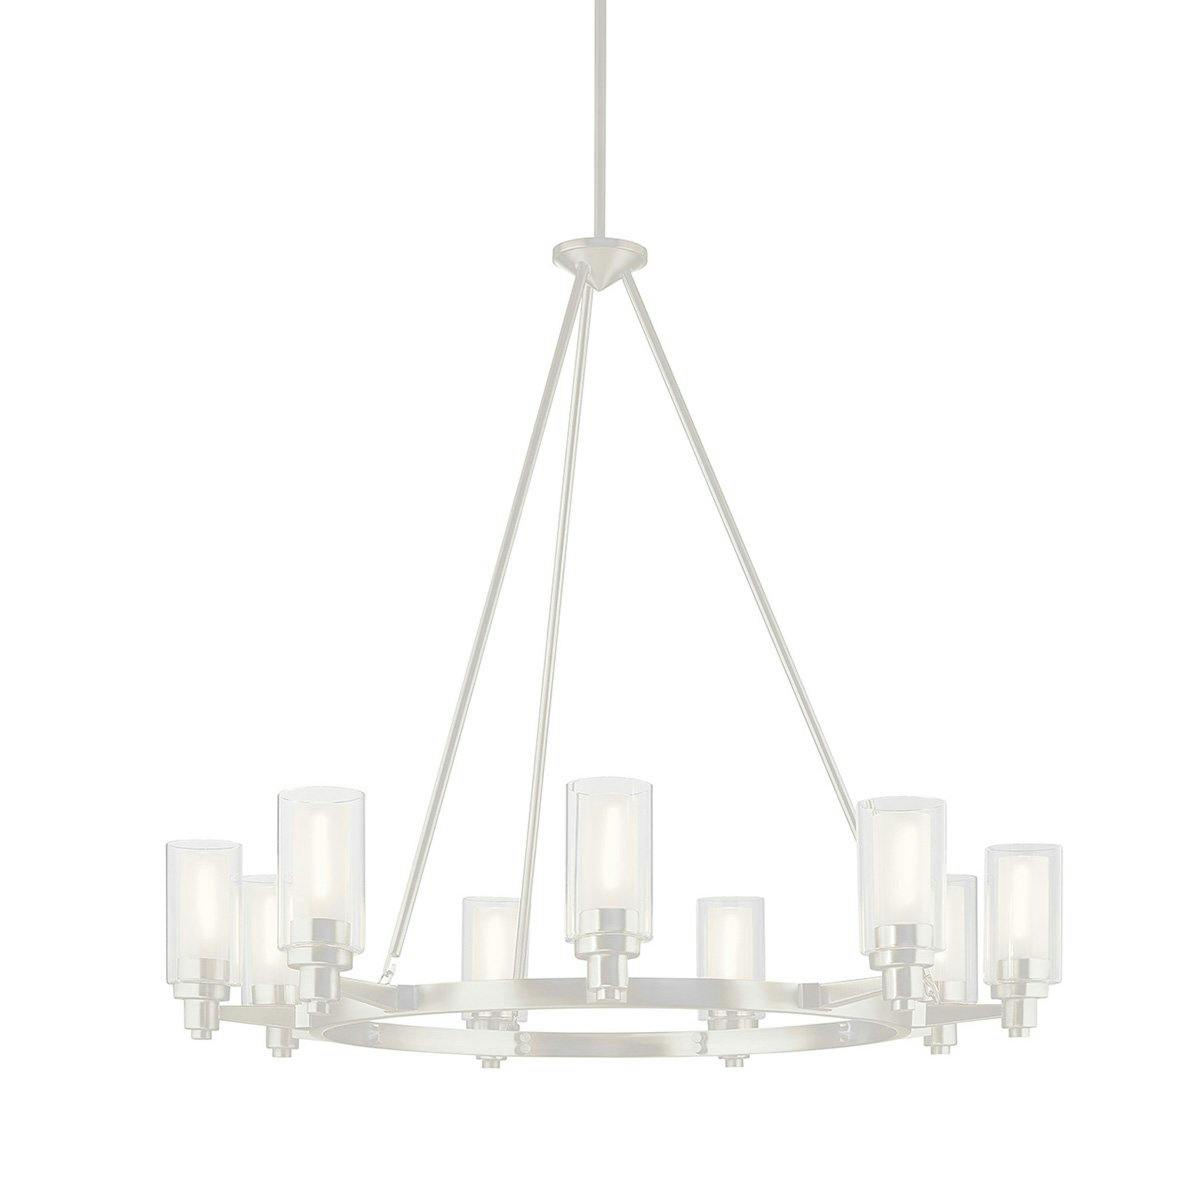 Circolo 9 Light Chandelier Brushed Nickel without the canopy on a white background